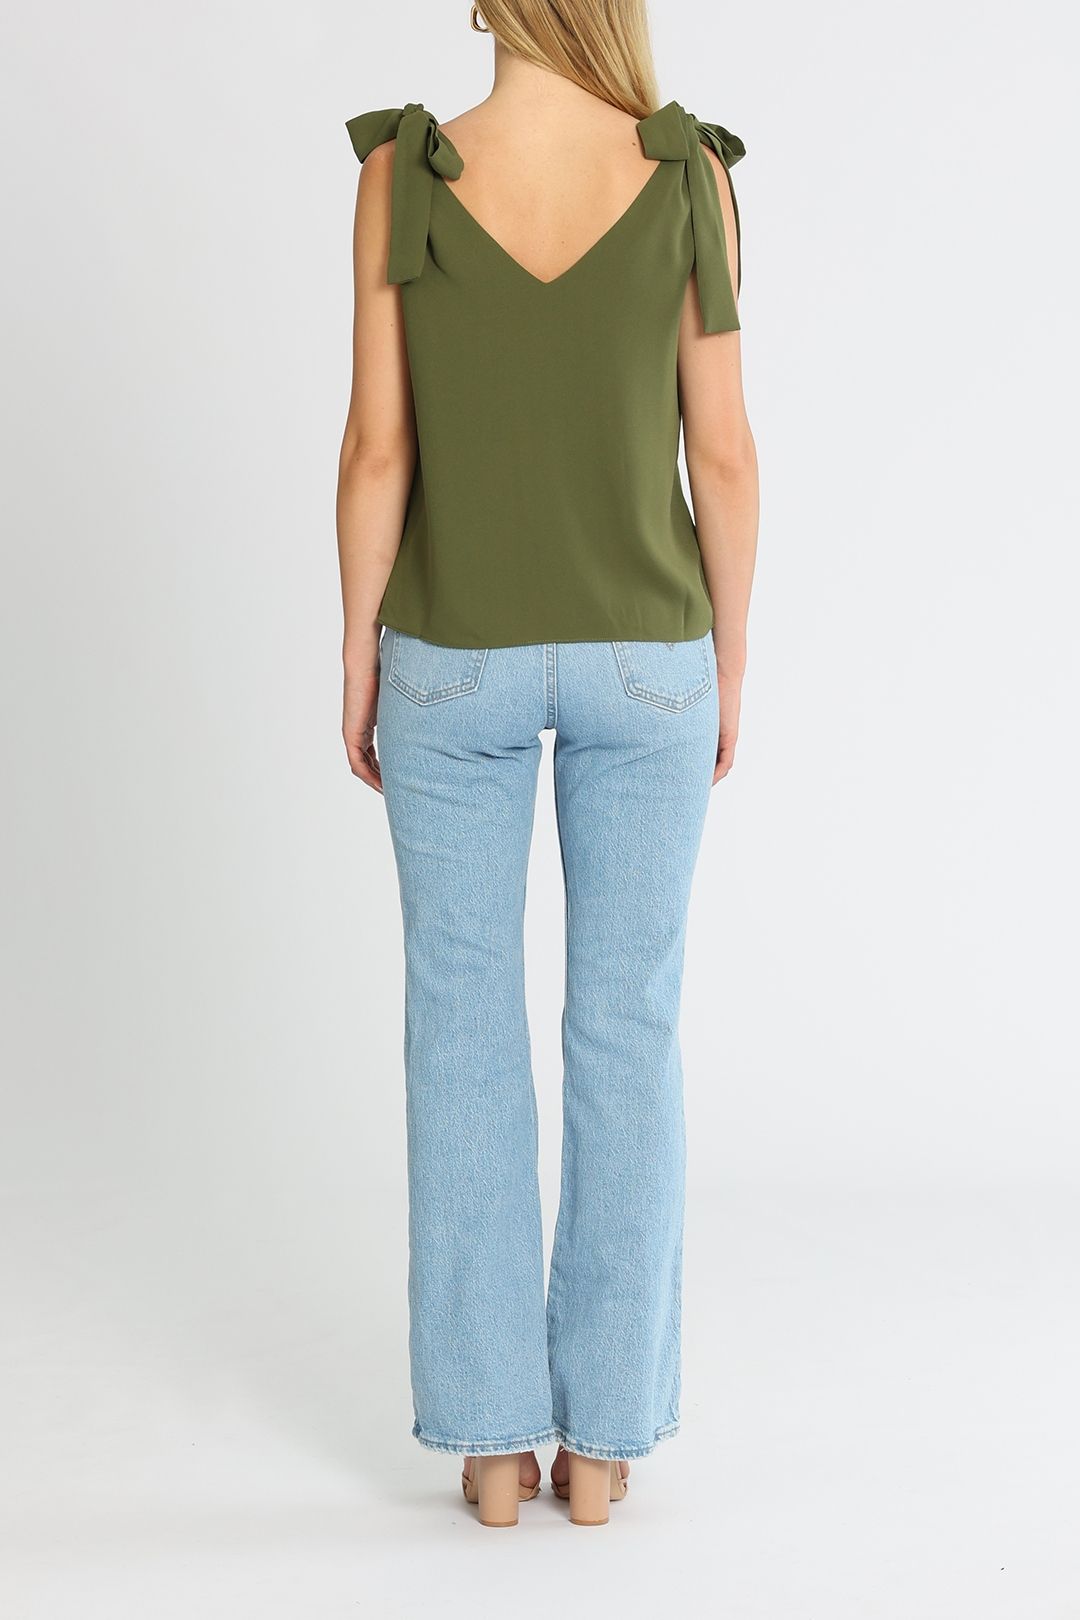 Belle and Bloom Feel For You V Neck Top Military Relaxed Fit